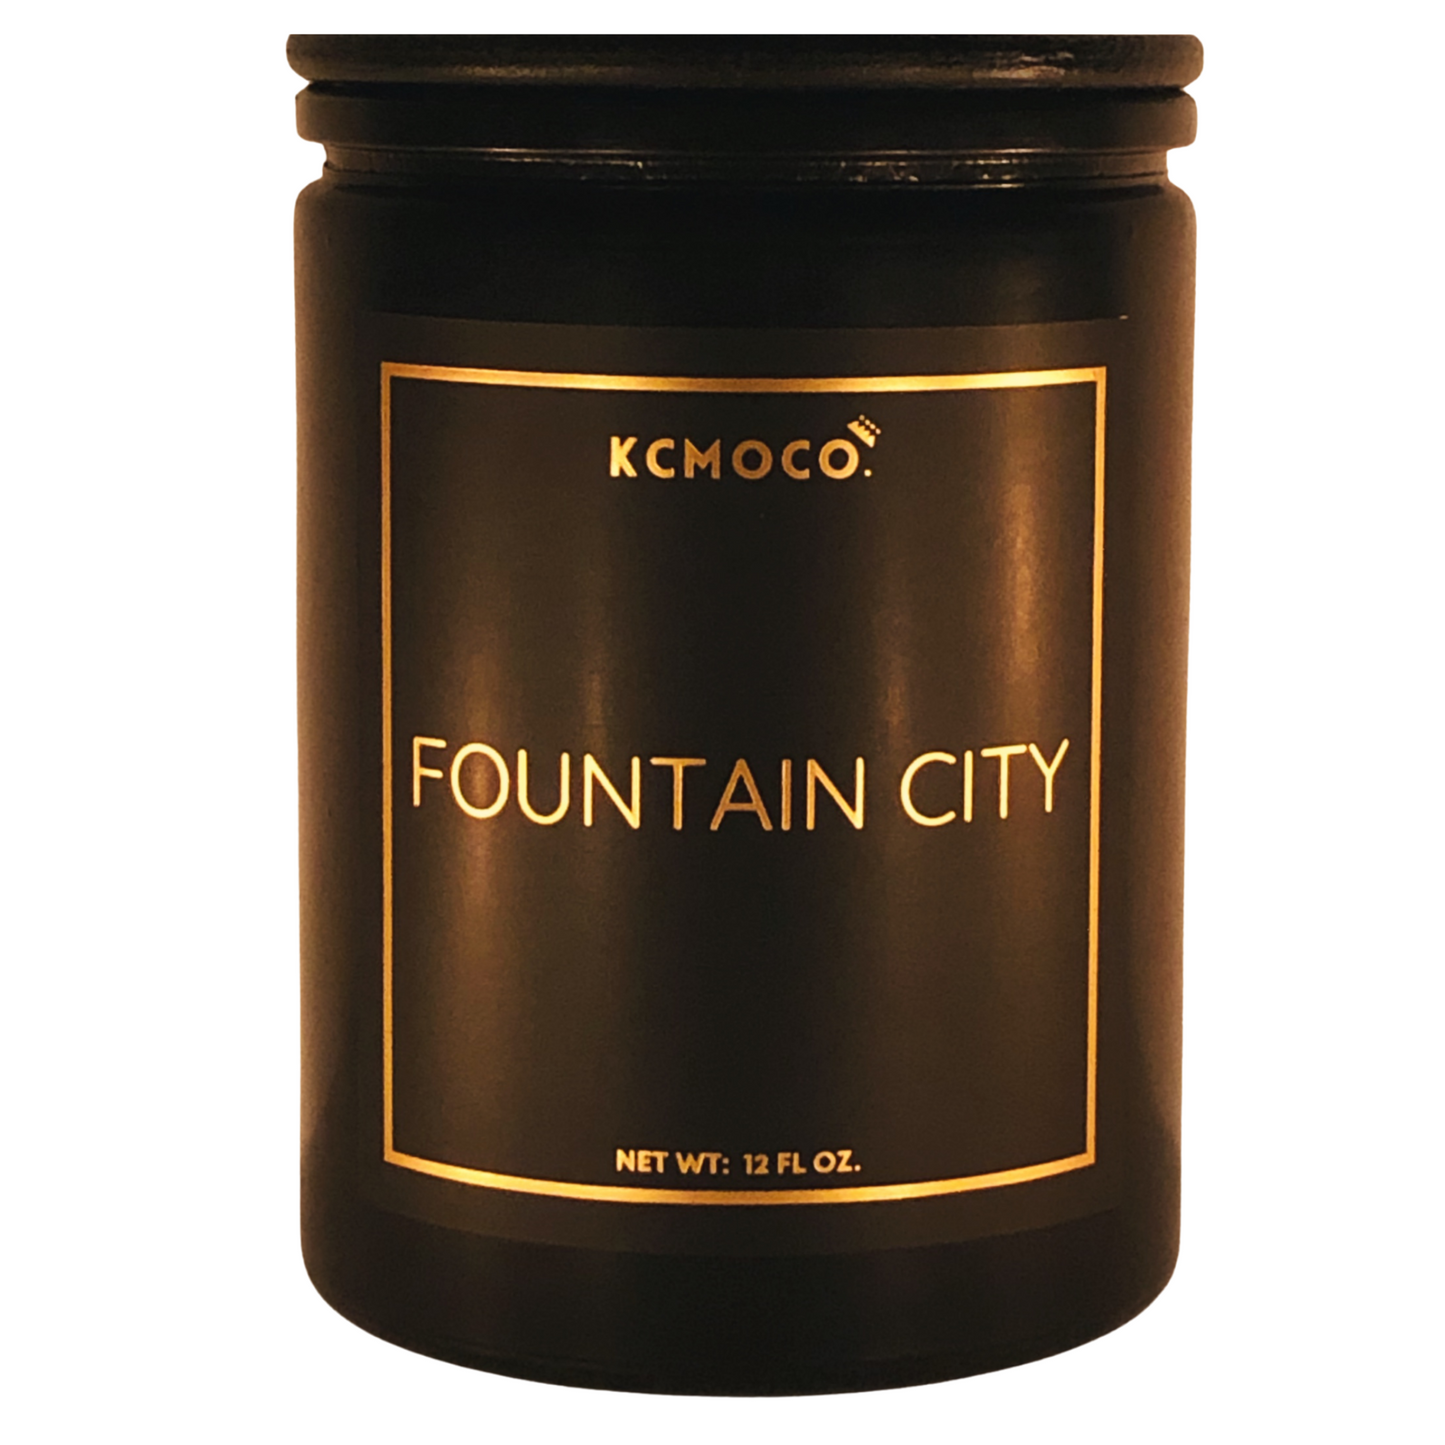 KCMOCO. Candles Fountain City Candle in Classic Collection Jar: Black glass jar with gold foil label reading "KCMOCO. Fountain City", with black bamboo lid.